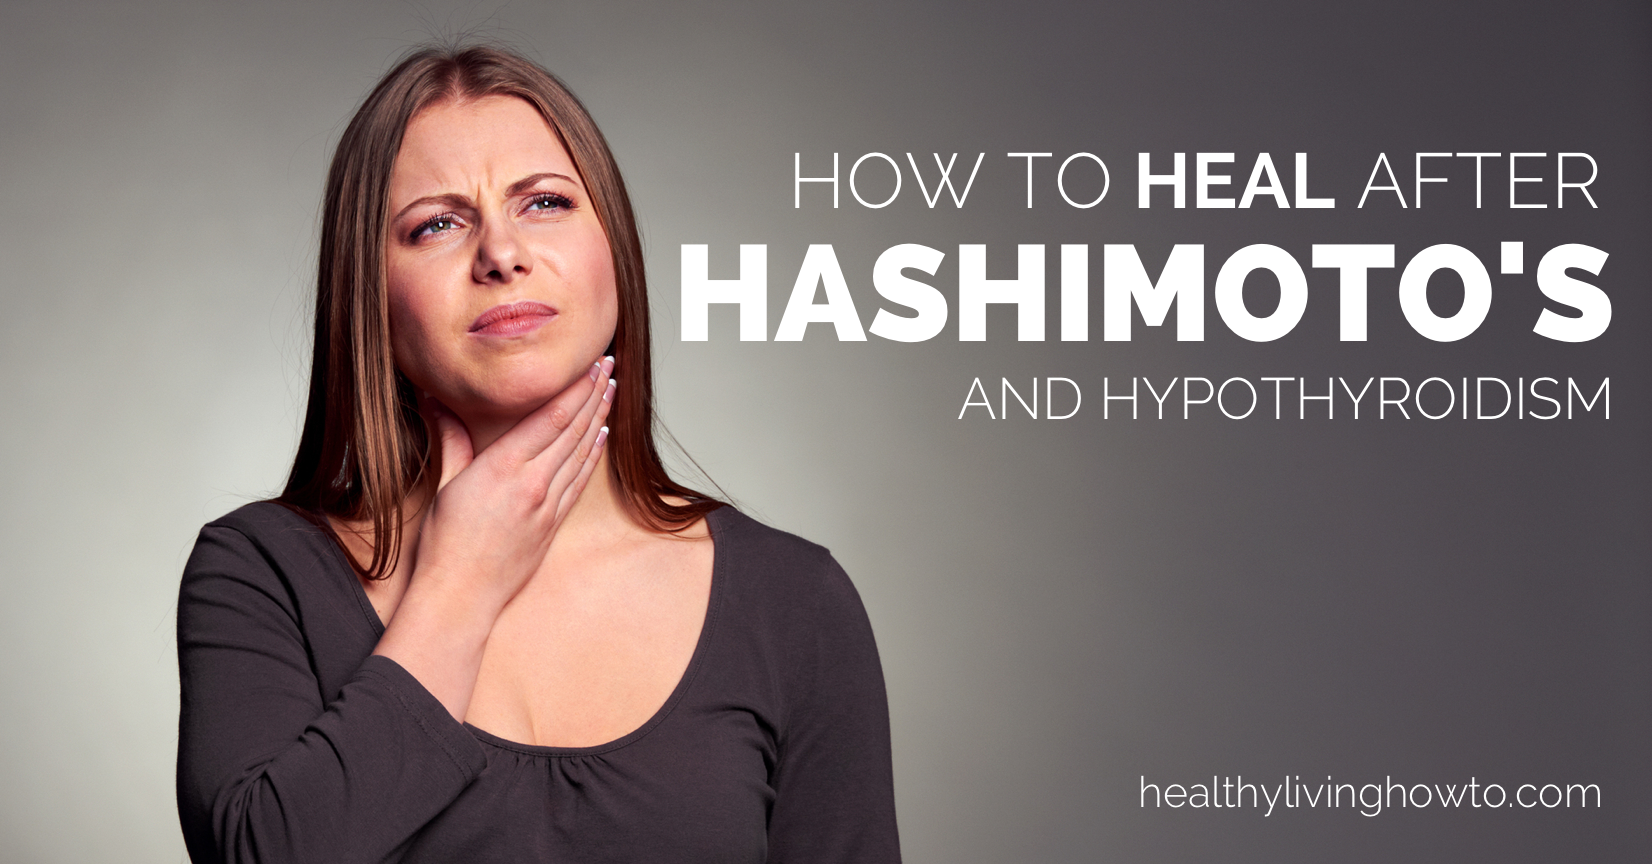 Regain Your Health After Hashimoto’s And Hypothyroidism